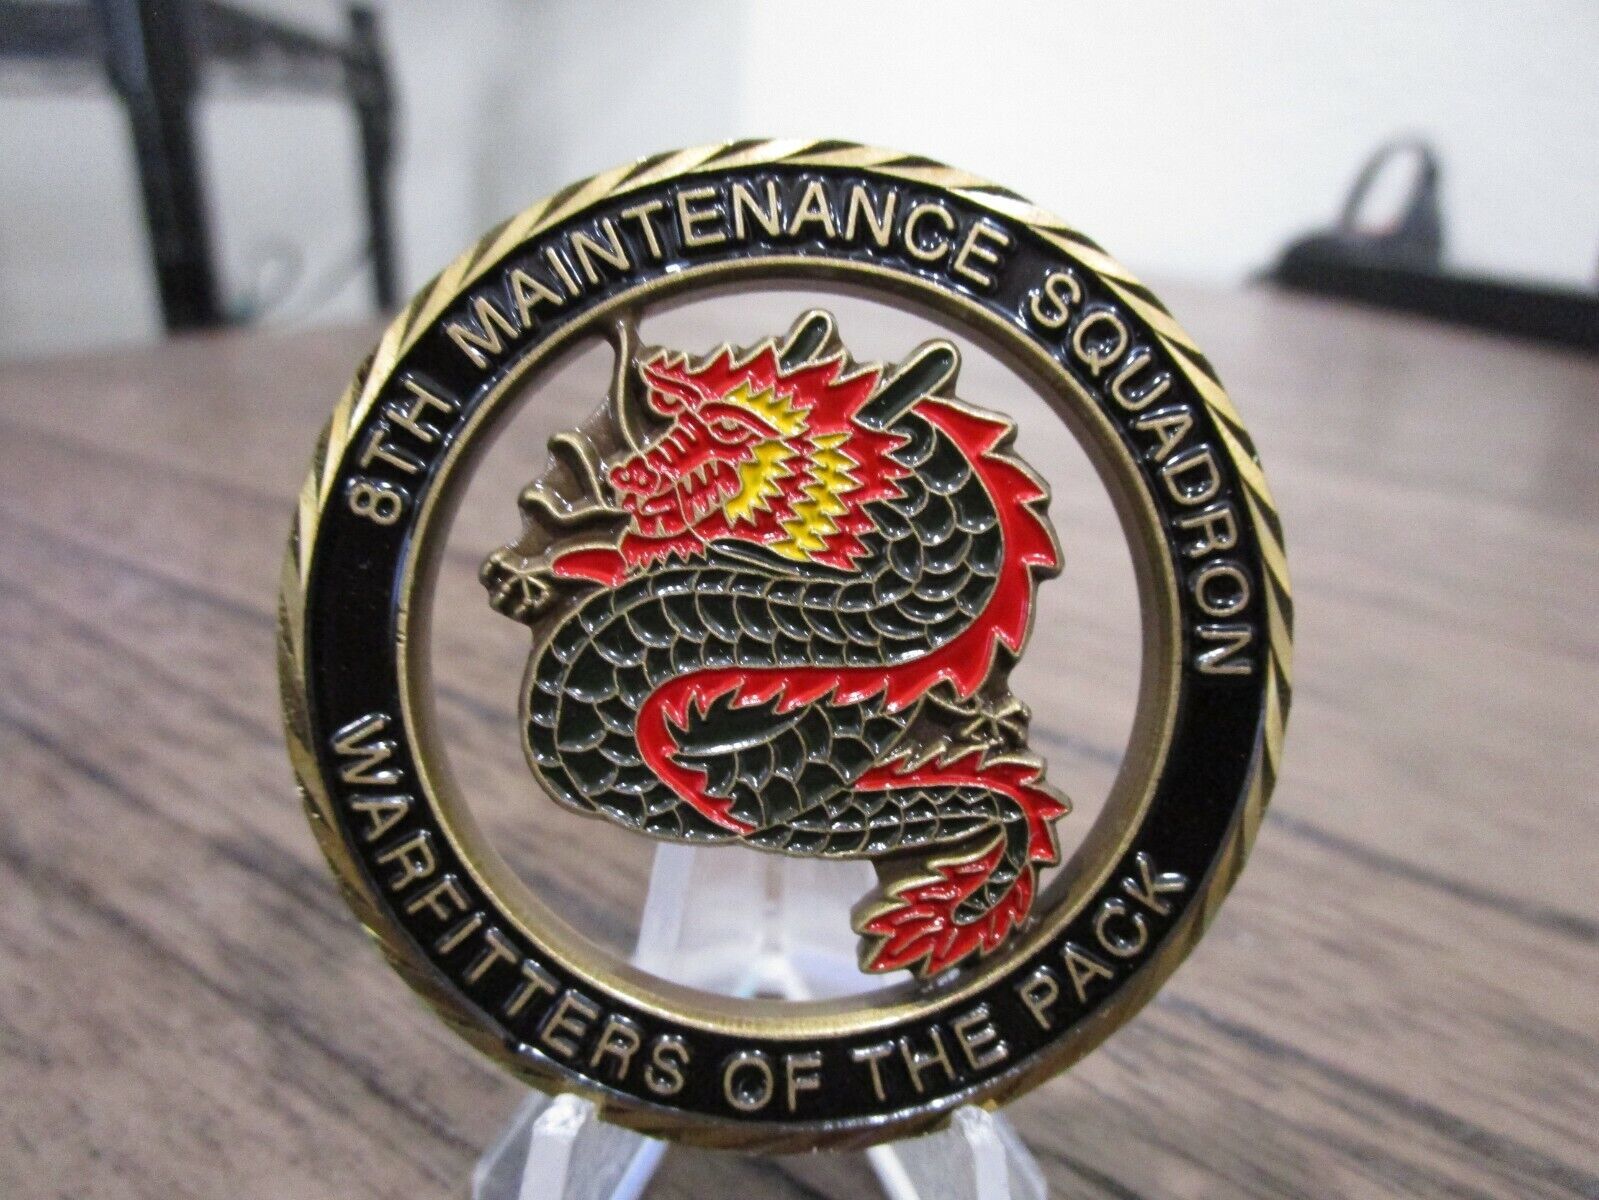 Primary image for US Army 8th Maintenance SQ Breathin Fire Kickin Ass Challenge Coin #50M